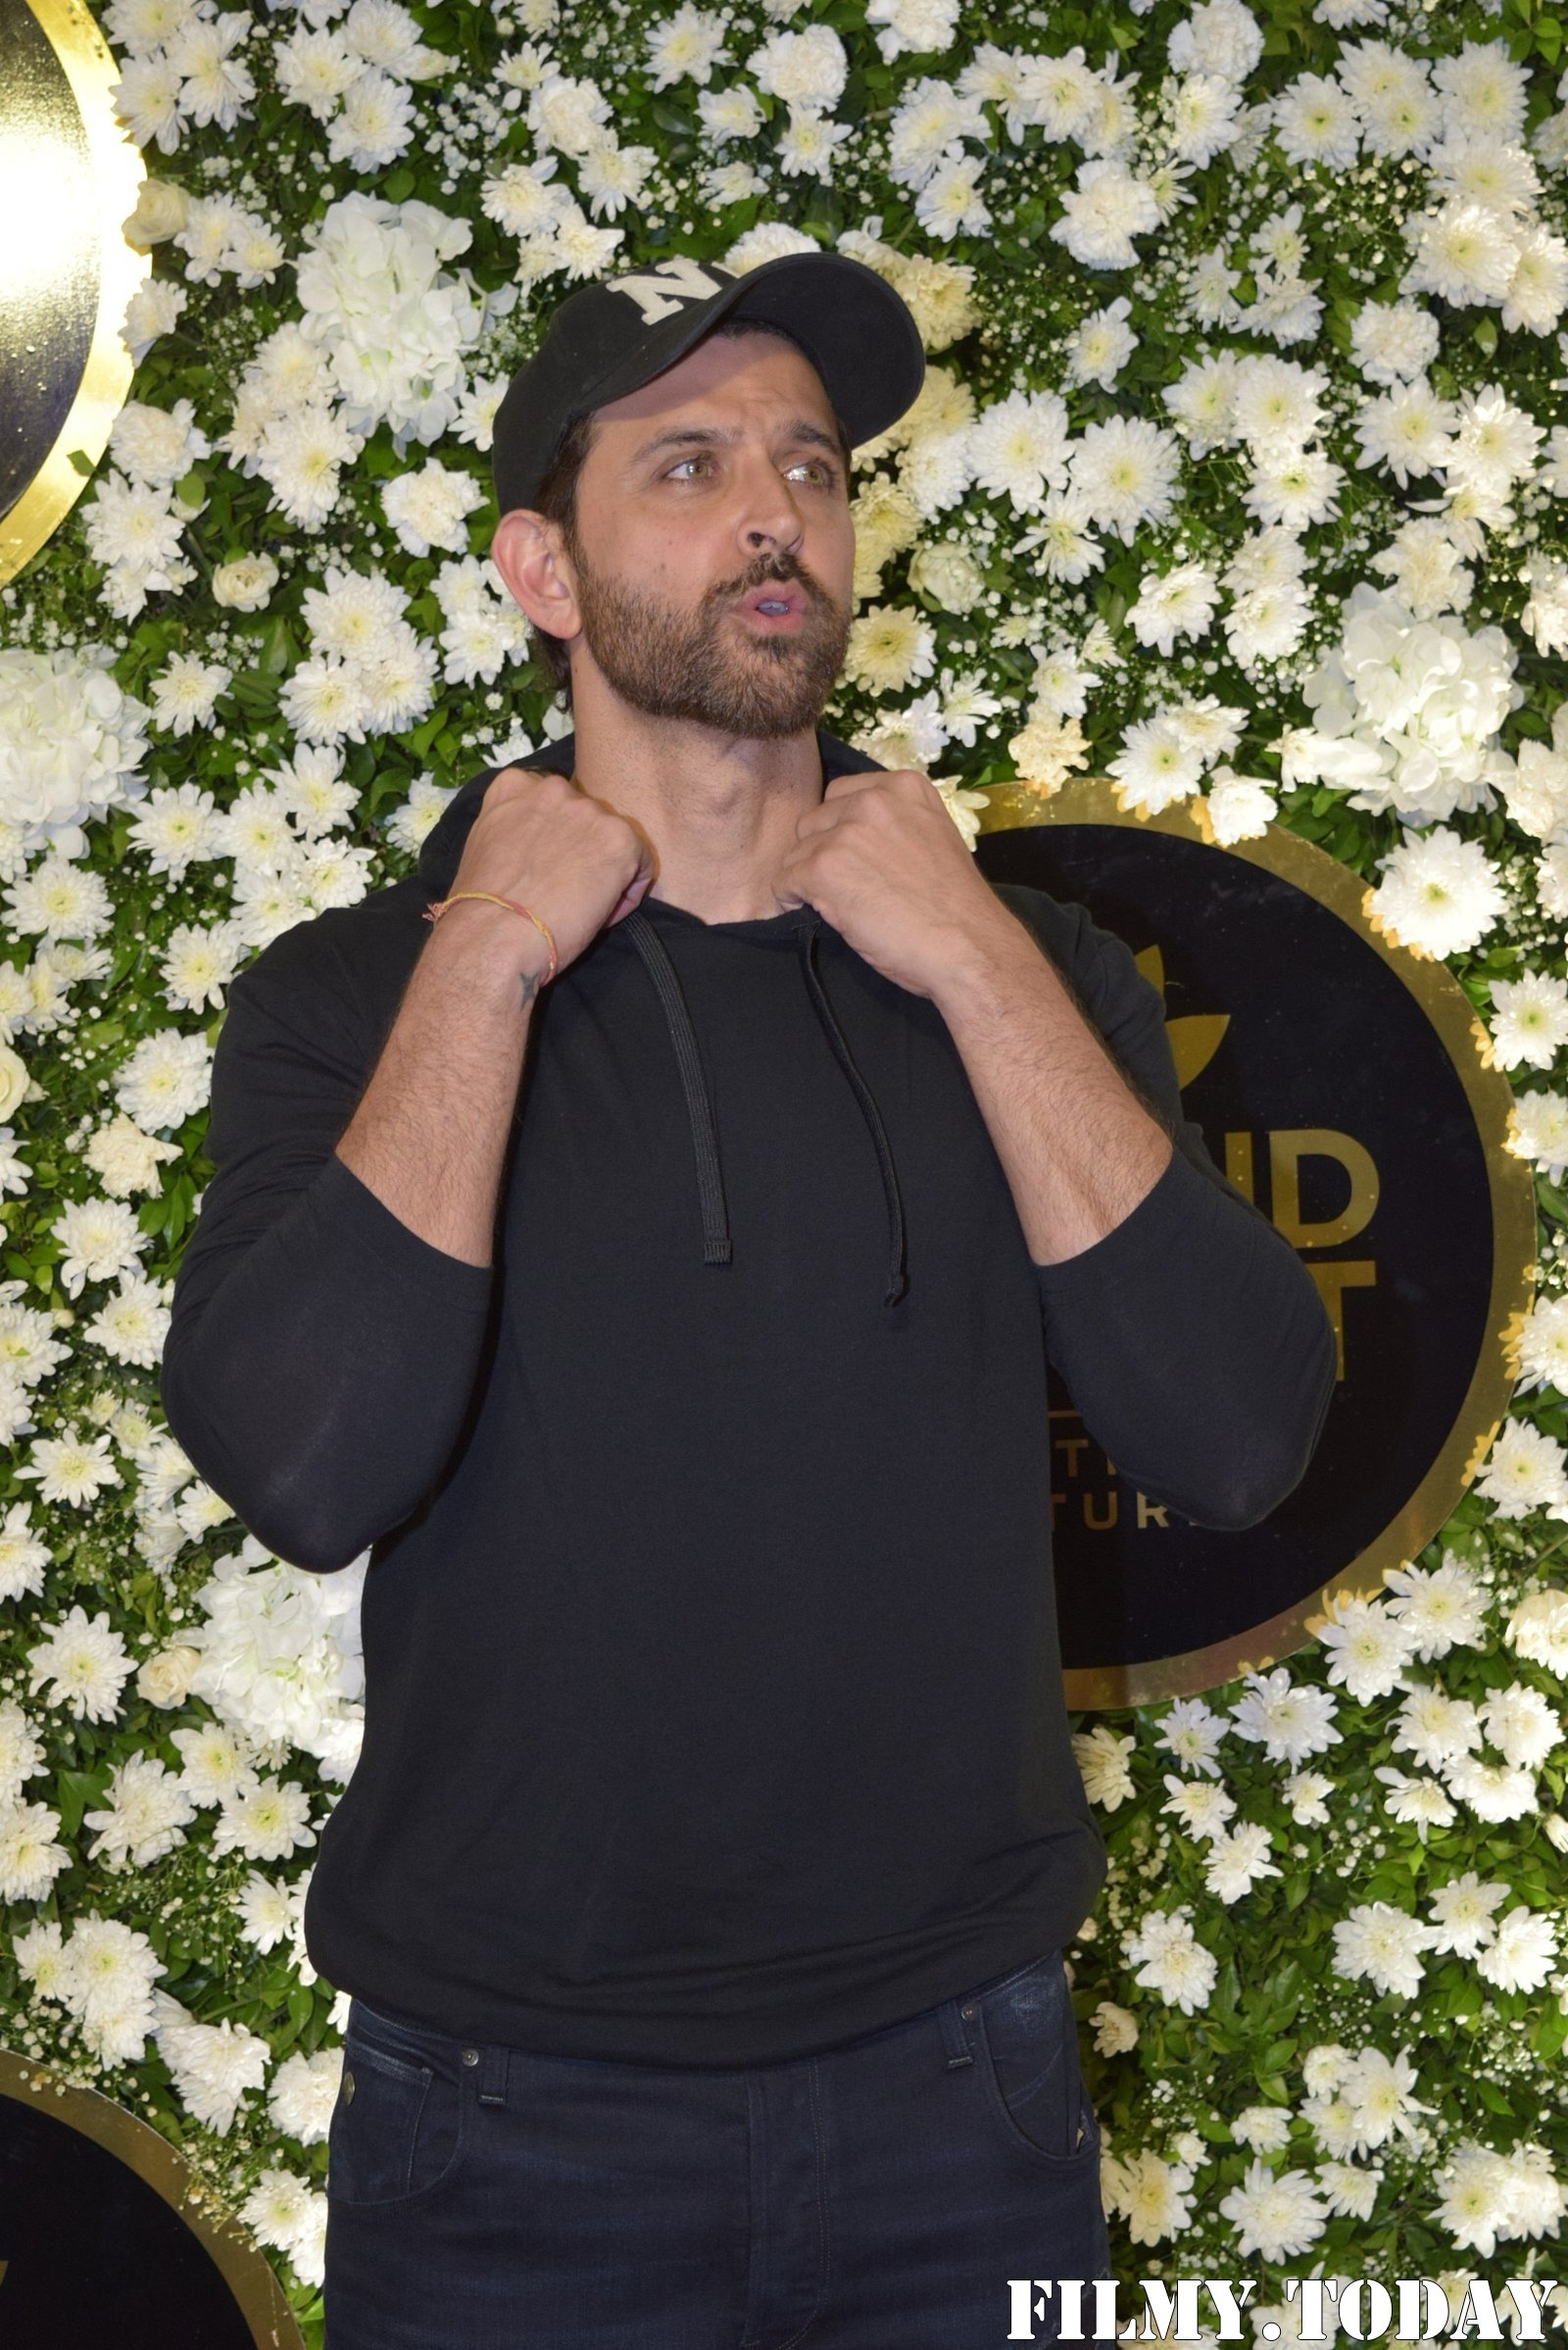 Hrithik Roshan - Photos: Celebs At Anand Pandit's Diwali Party | Picture 1693625